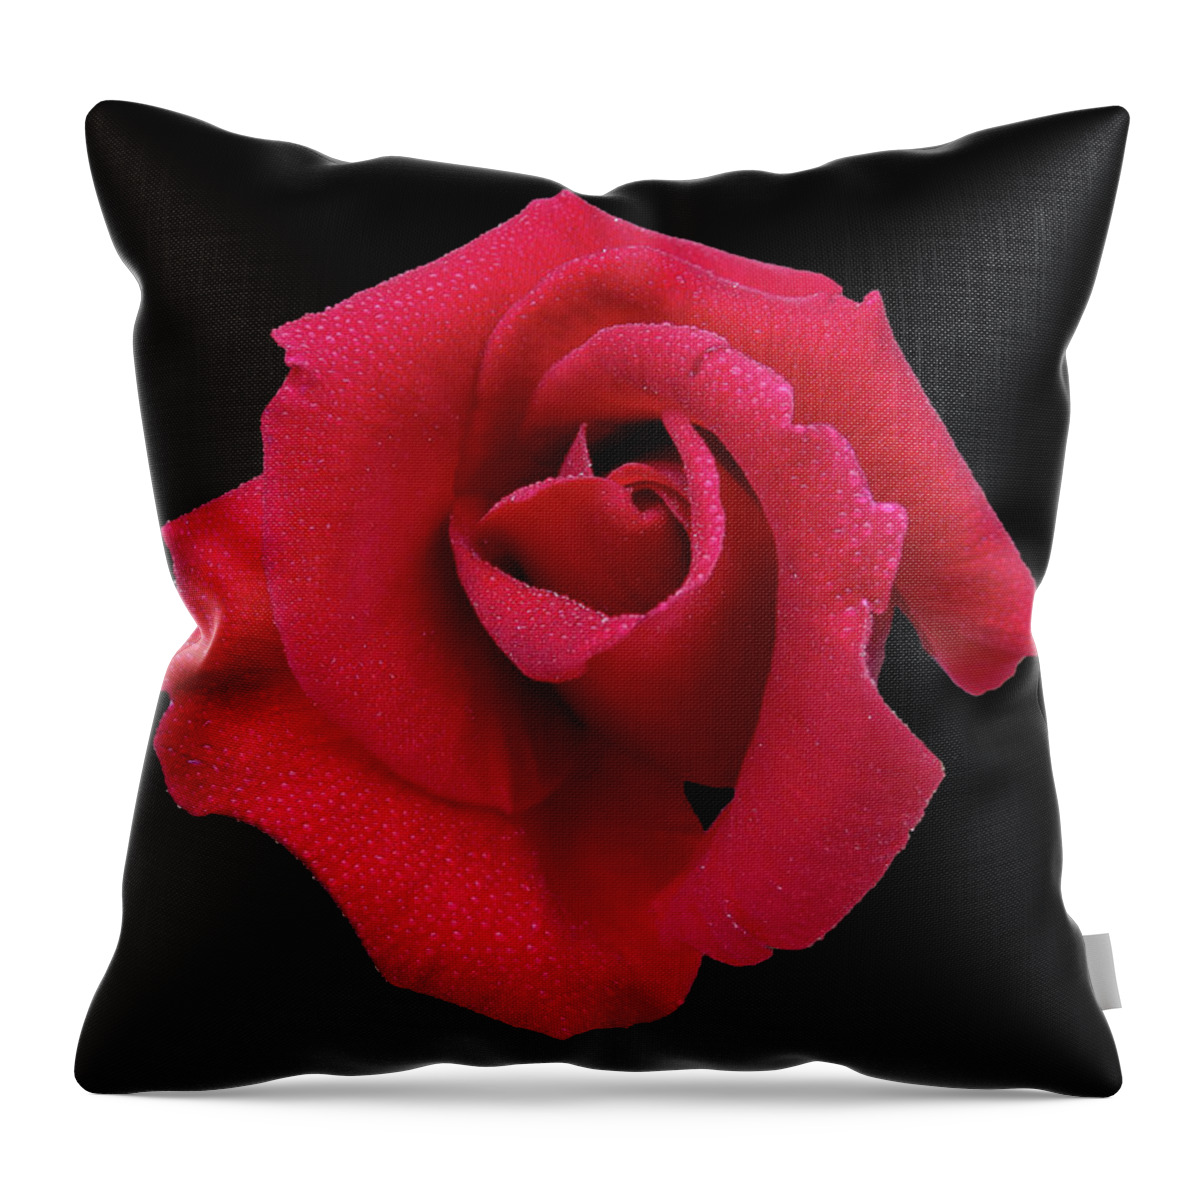 Rose Throw Pillow featuring the photograph Christine by Mark Blauhoefer